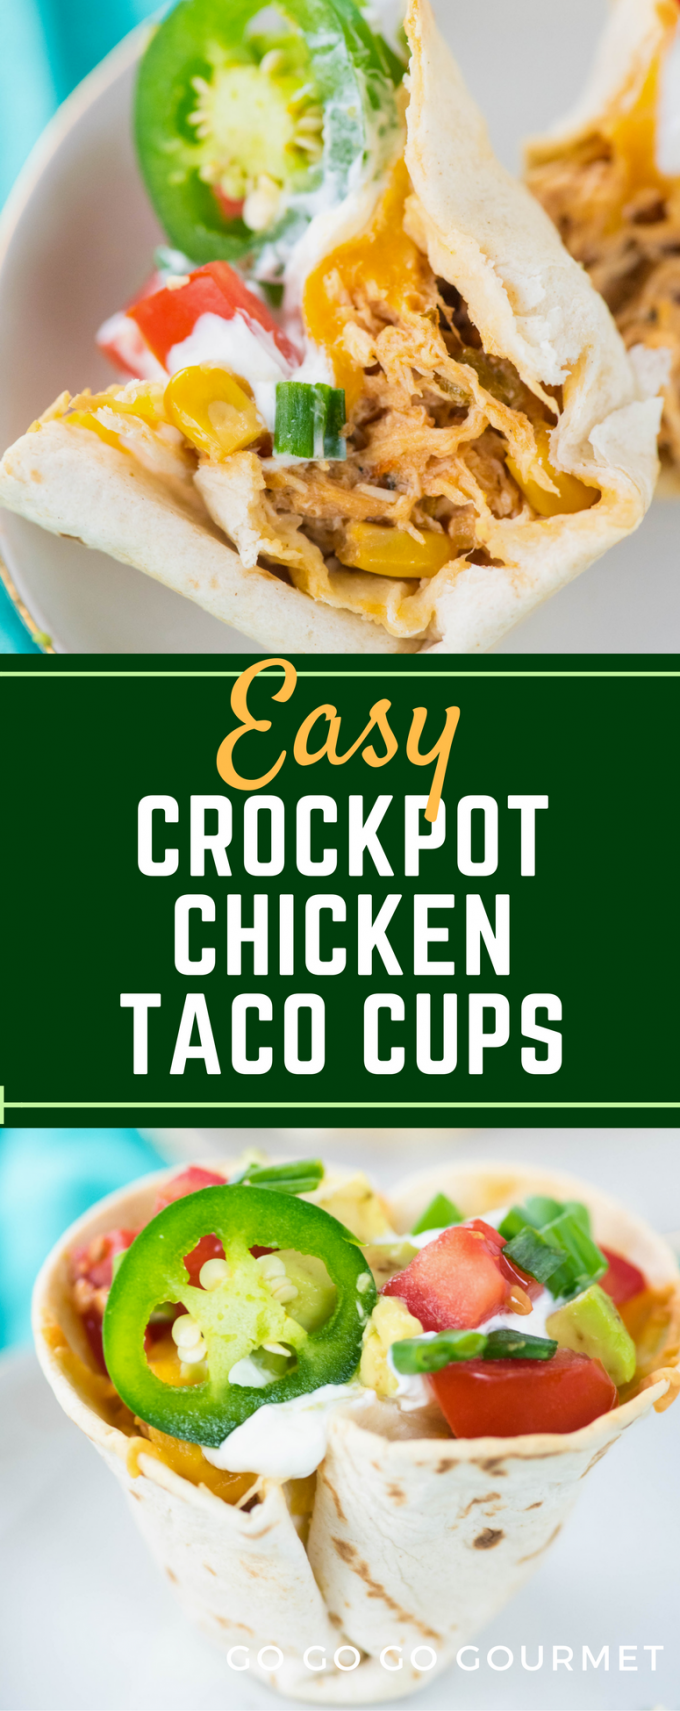 These easy crockpot shredded chicken taco cups are an easy appetizer- just cook chicken breasts with salsa in the slow cooker, then fill and bake in the oven! #gogogogourmet #slowcookerrecipes #chickentacocups #easychickenrecipes via @gogogogourmet